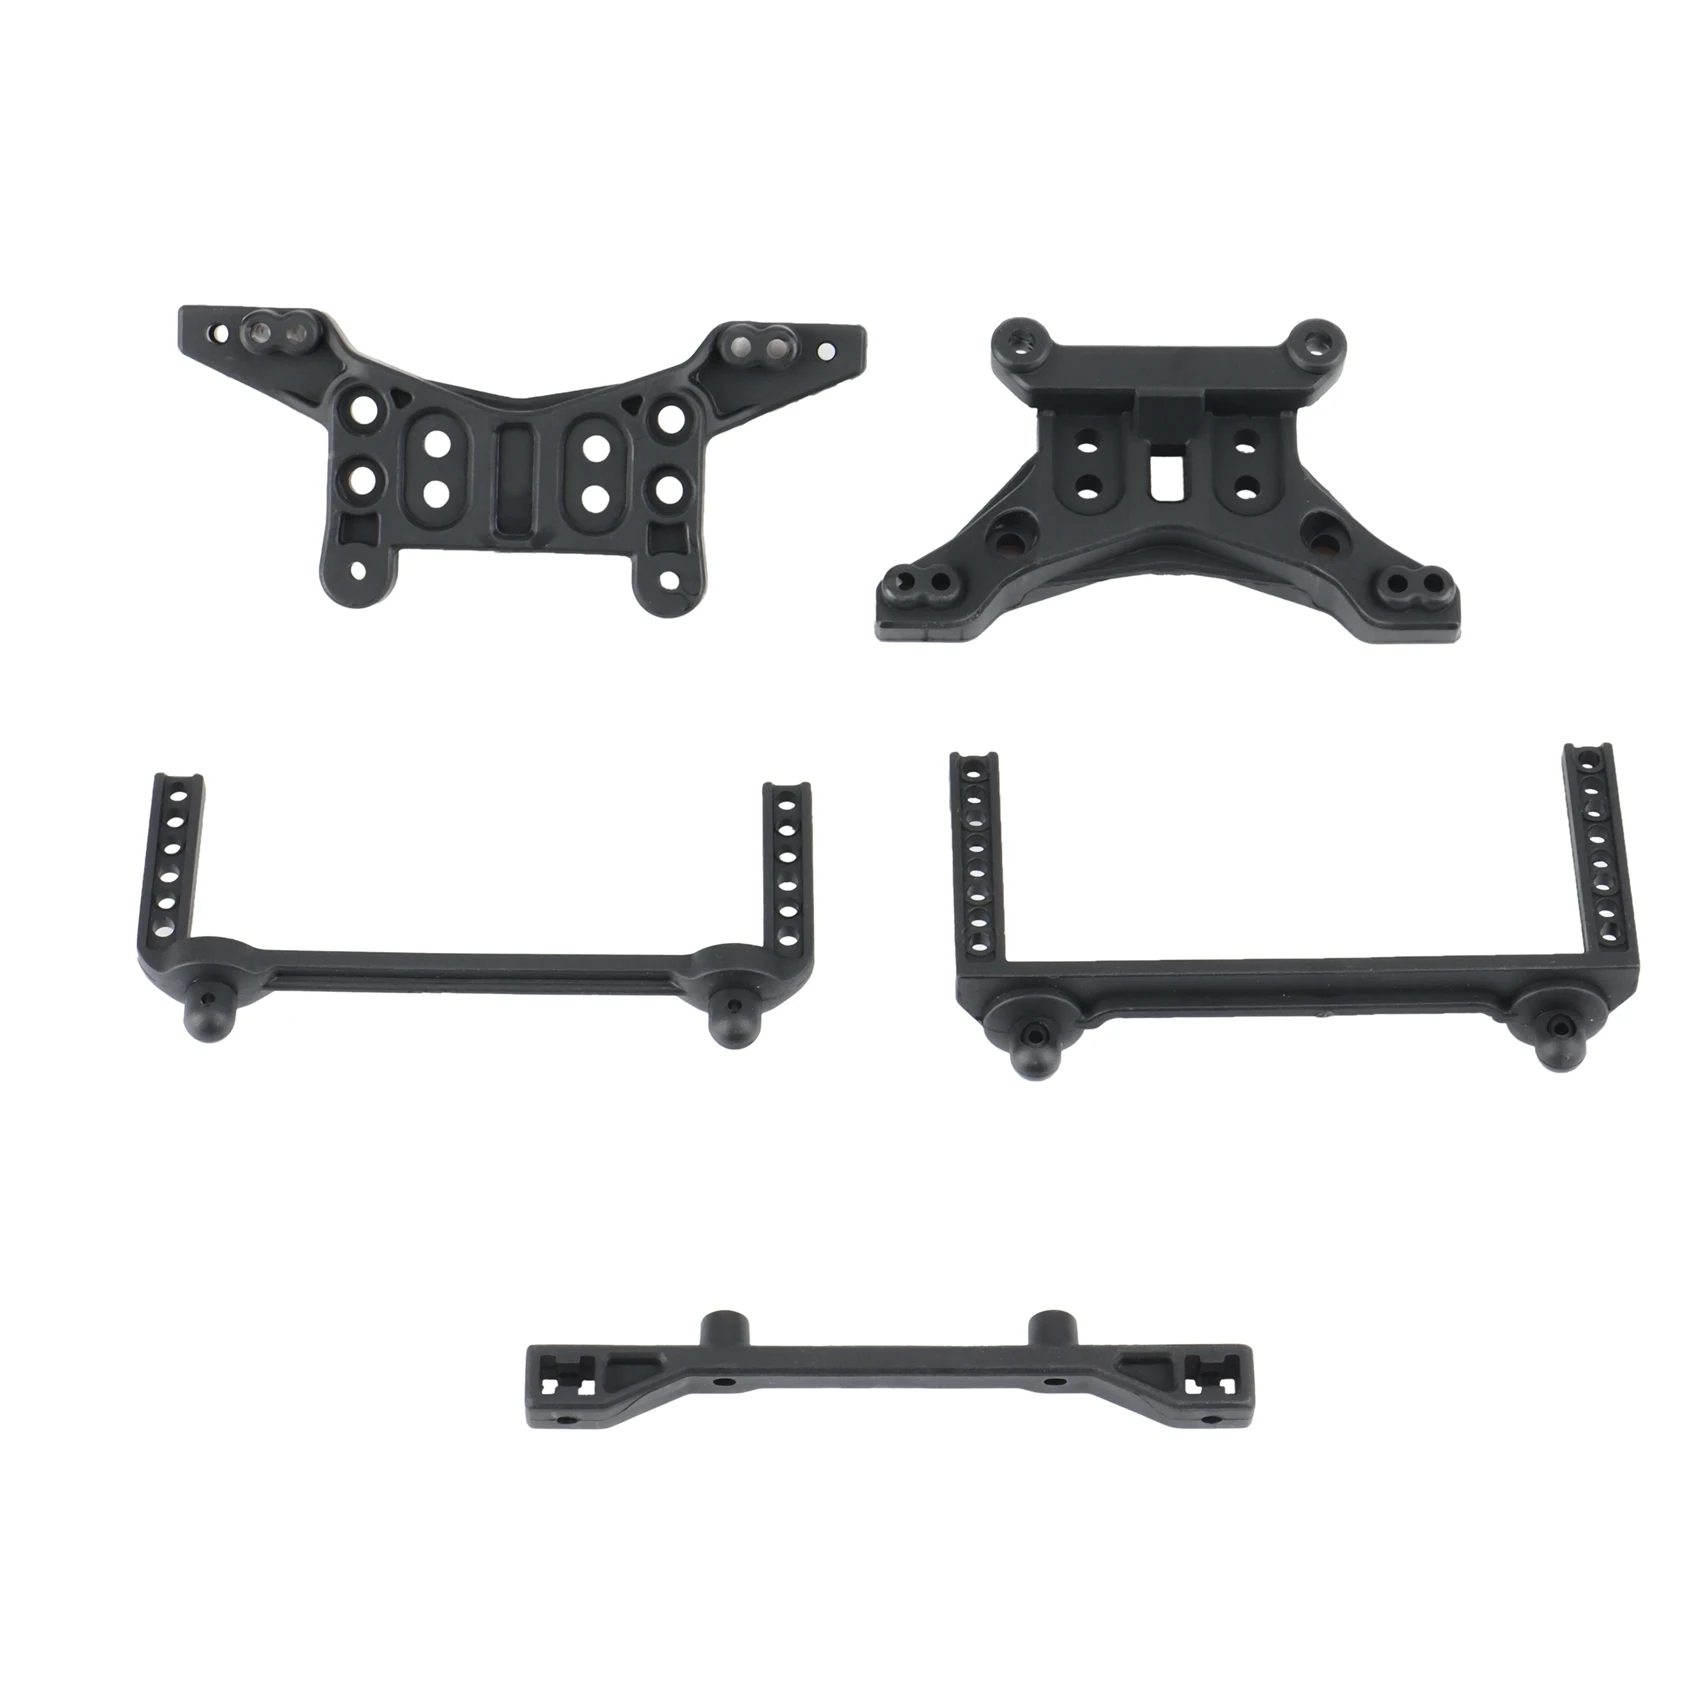 

Front & Rear Shock Towers Body Posts Set for HBX 16889 16889A 16890 16890A SG 1601 SG 1602 RC Car Parts Accessories